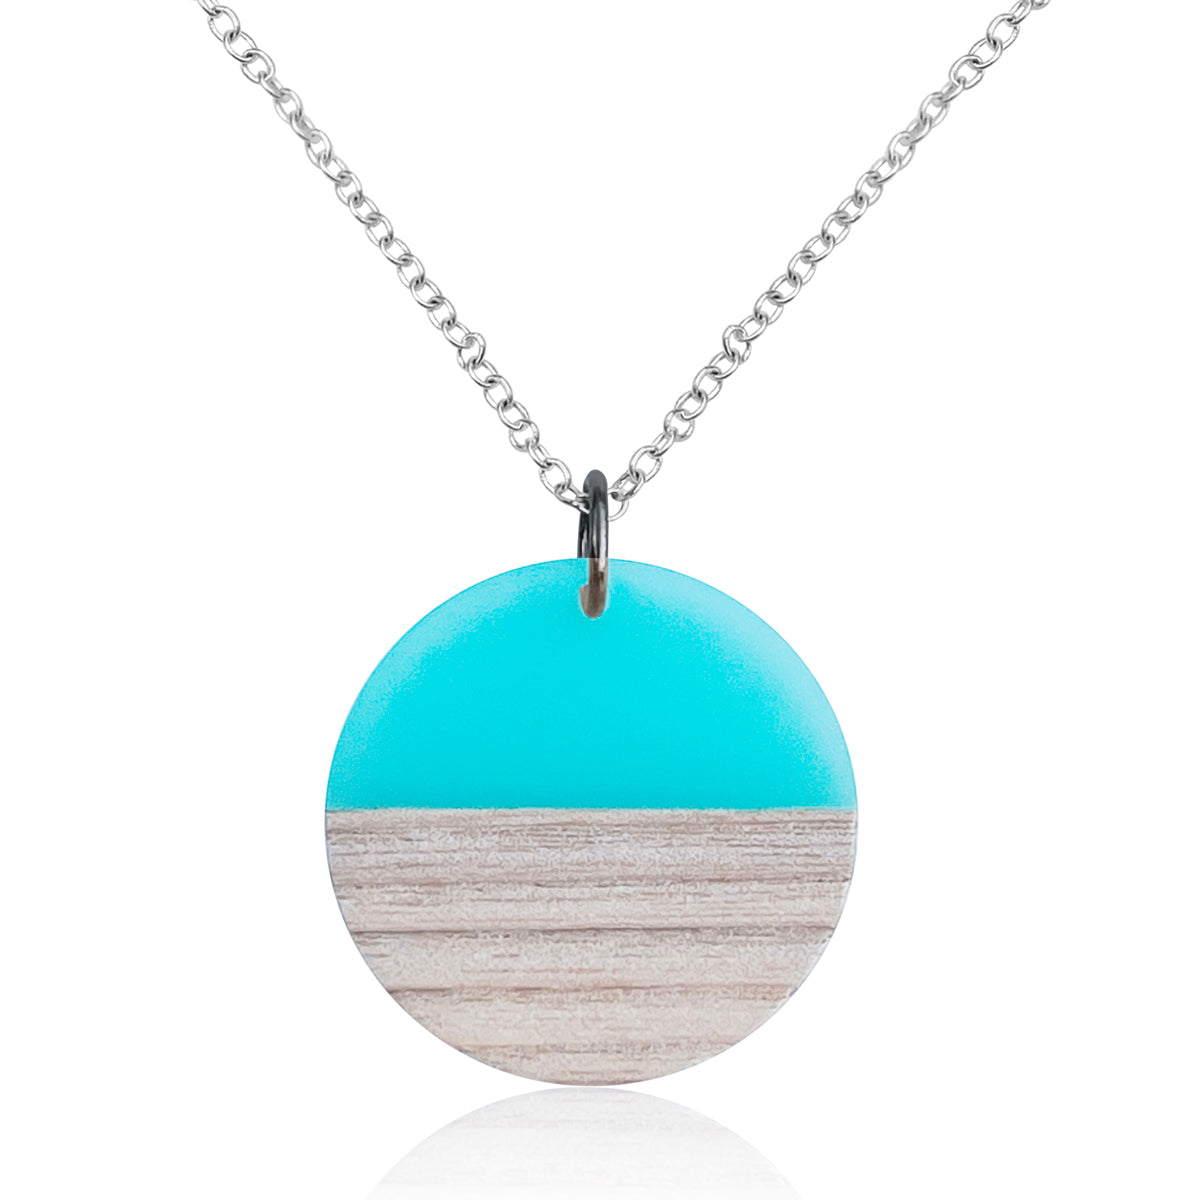 This stunning Coastal Horizon Necklace features a round pendant made of wood and turquoise blue resin, reminiscent of the sand and ocean. This Coastal Horizon Necklace helps you stay in that Endless Summer mindset all year around. 